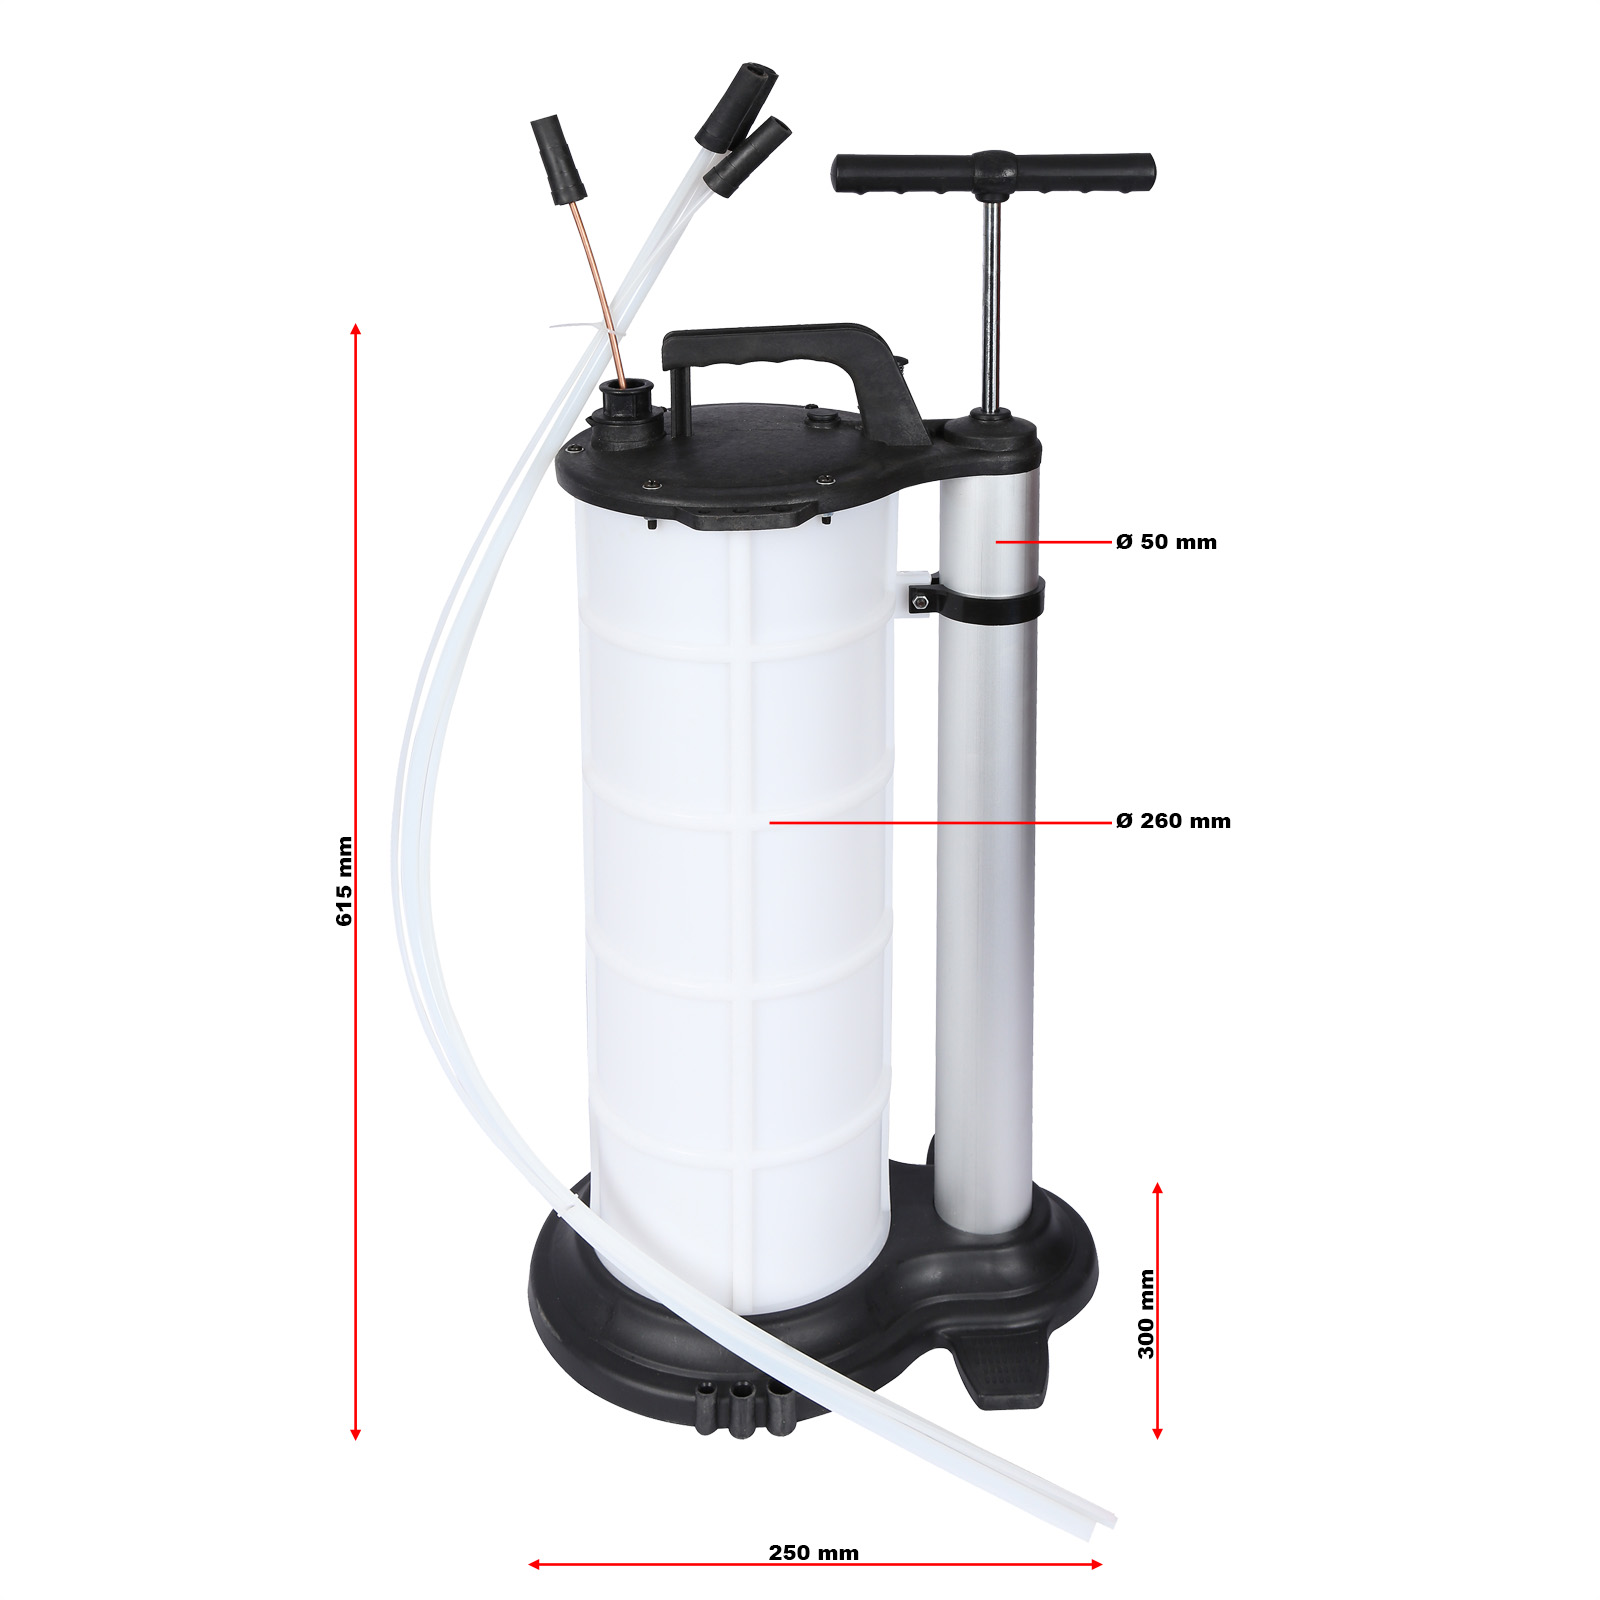 Manual Fluid Extractor with 9l Tank for Oils, Water, etc.